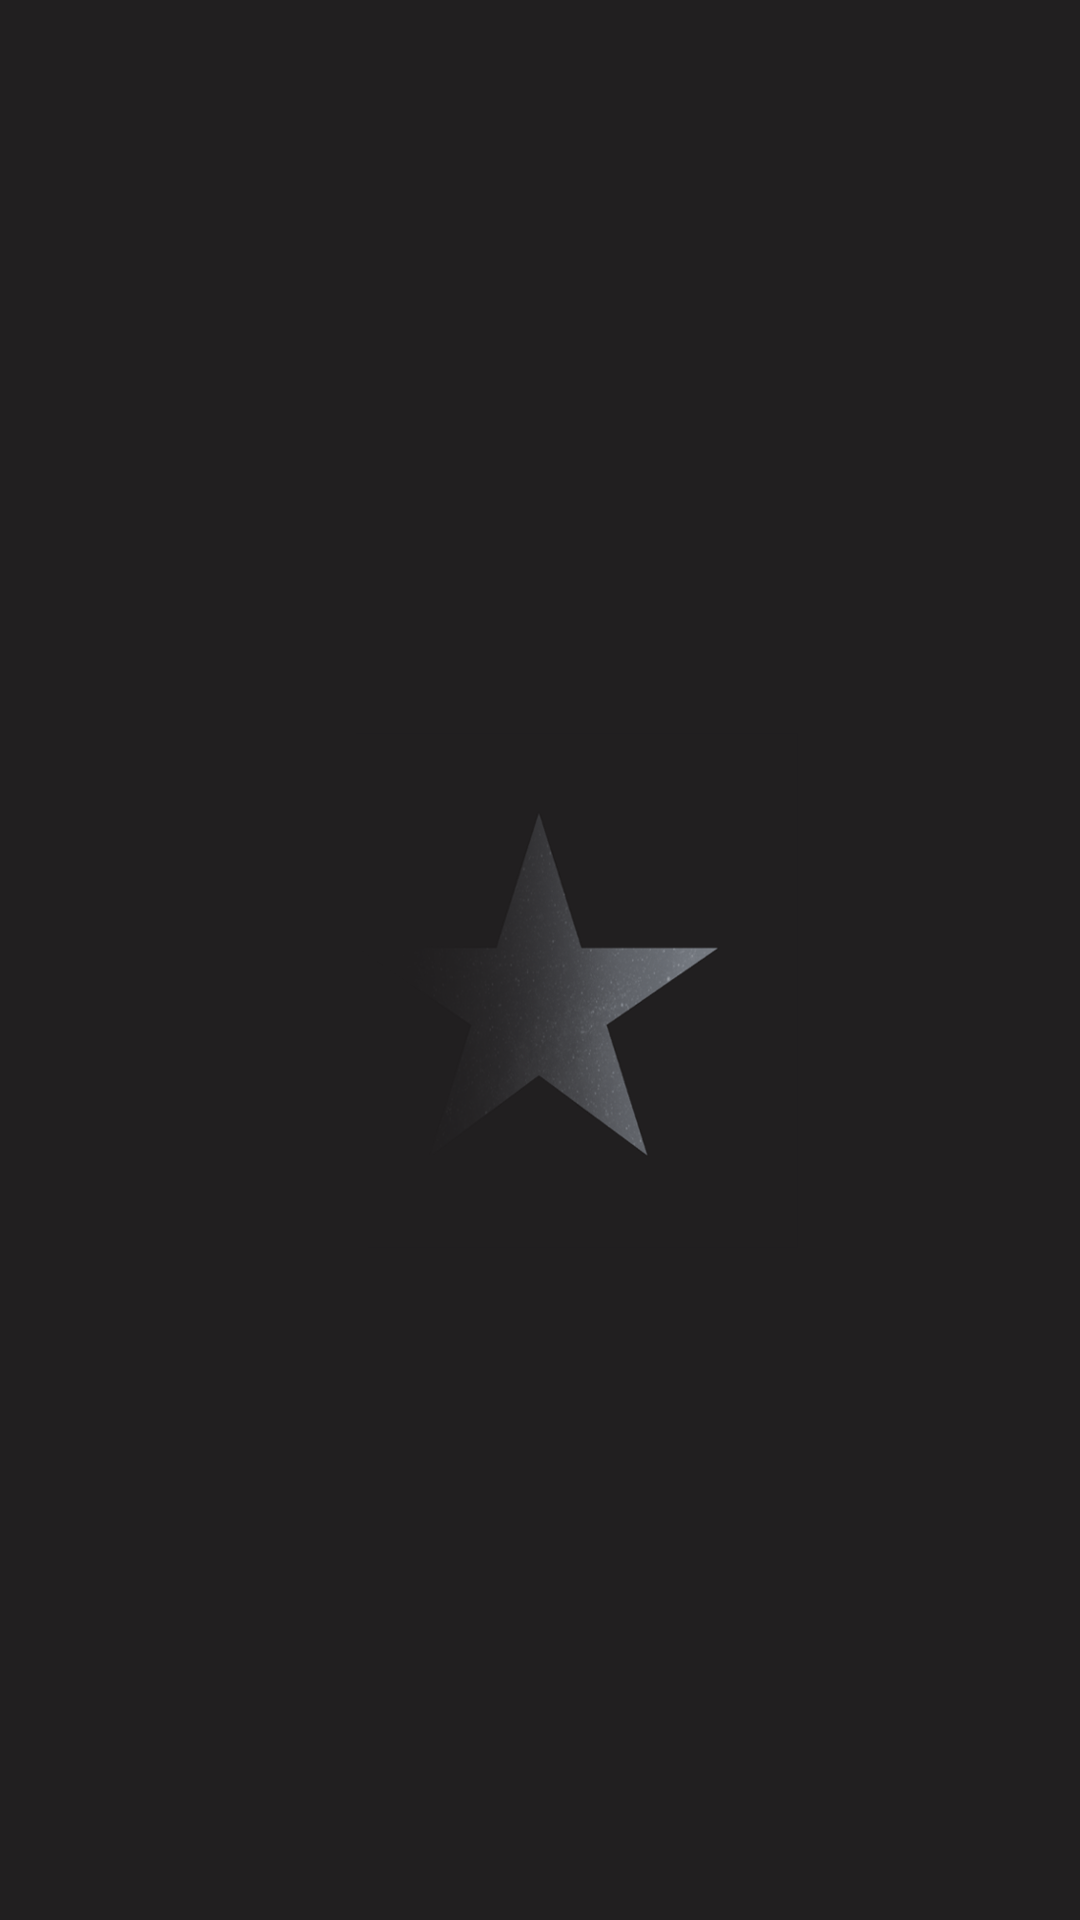 Here's my attempt to make a Blackstar phone wallpaper. I hope you'll